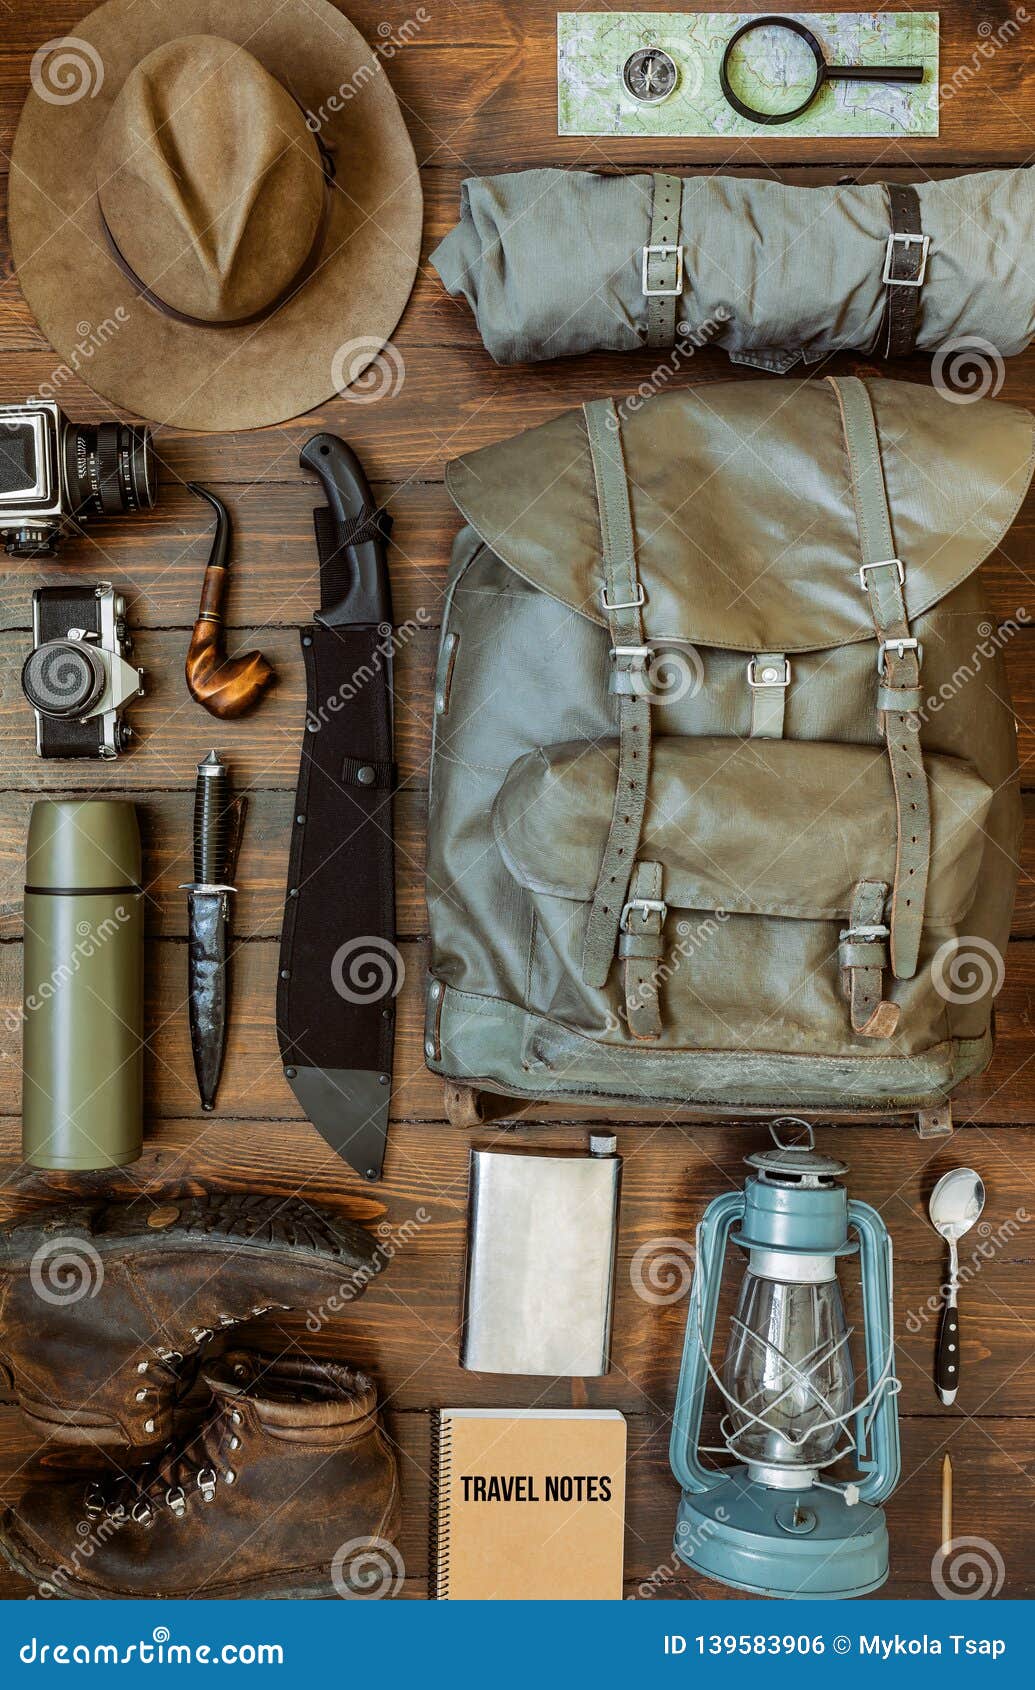 Camping Gear Including Knife, Clothes, Boots, Lantern, Camera, Hat